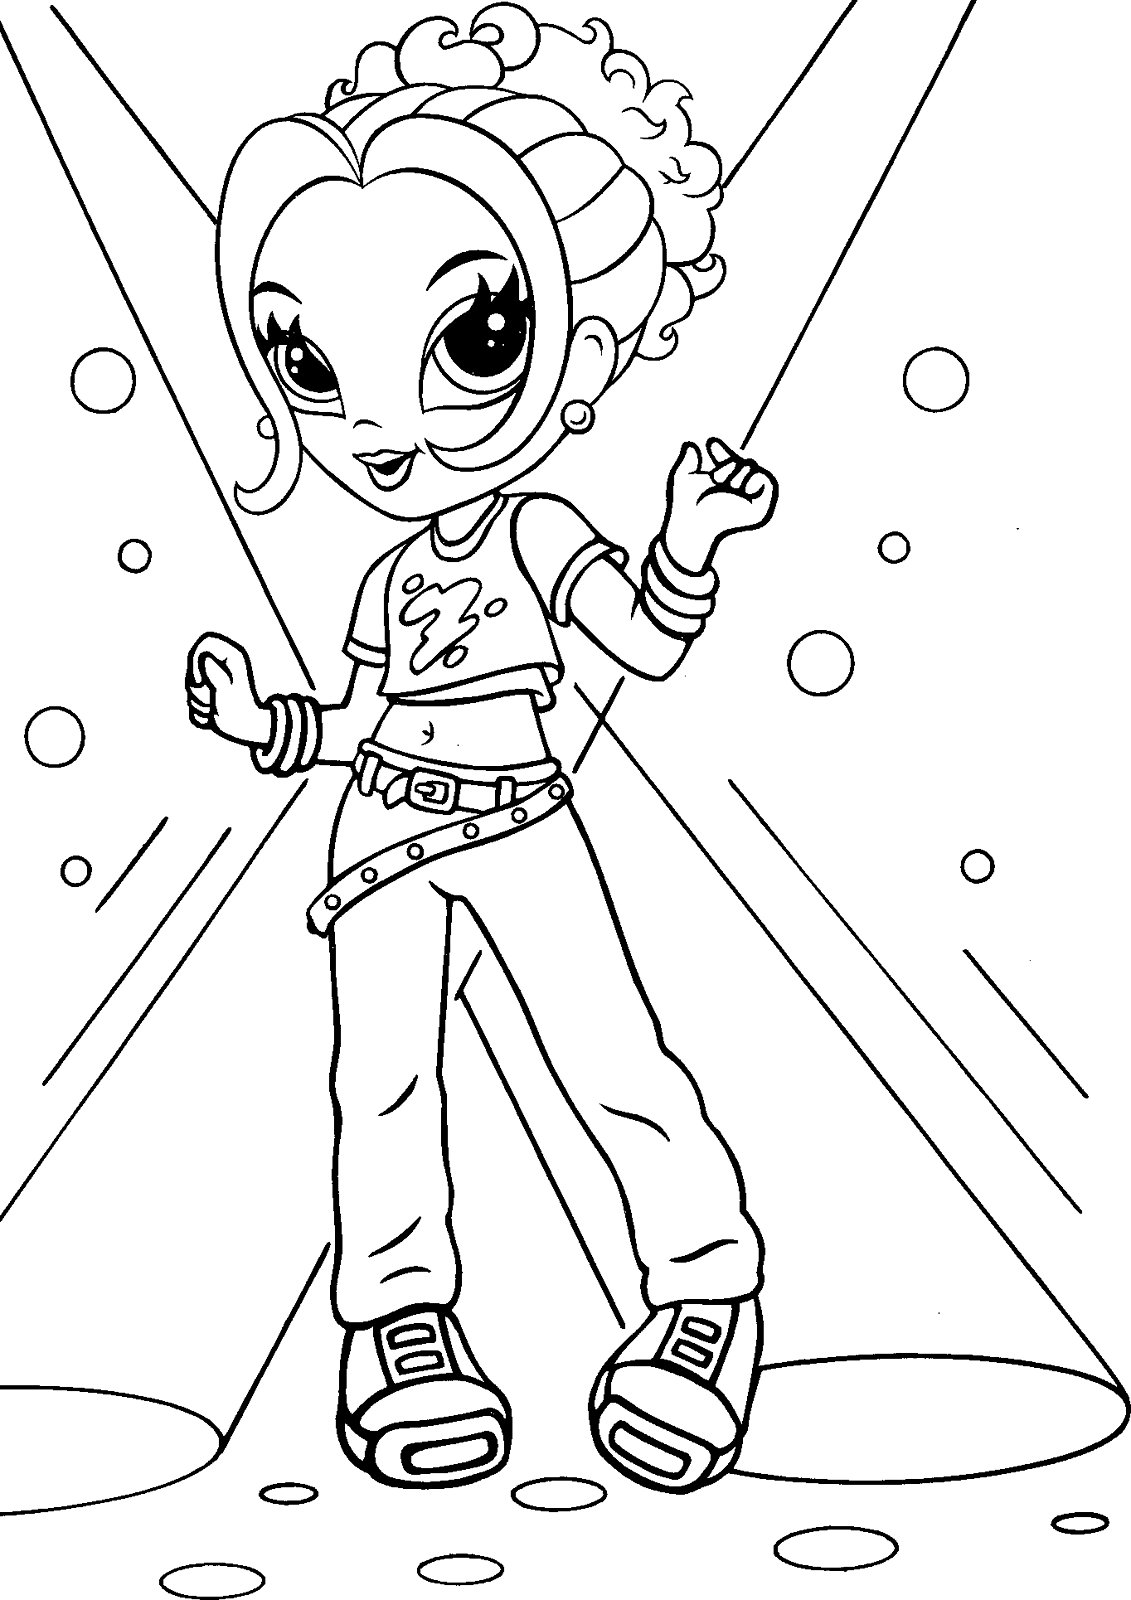 Coloring page - Stylish girls dance